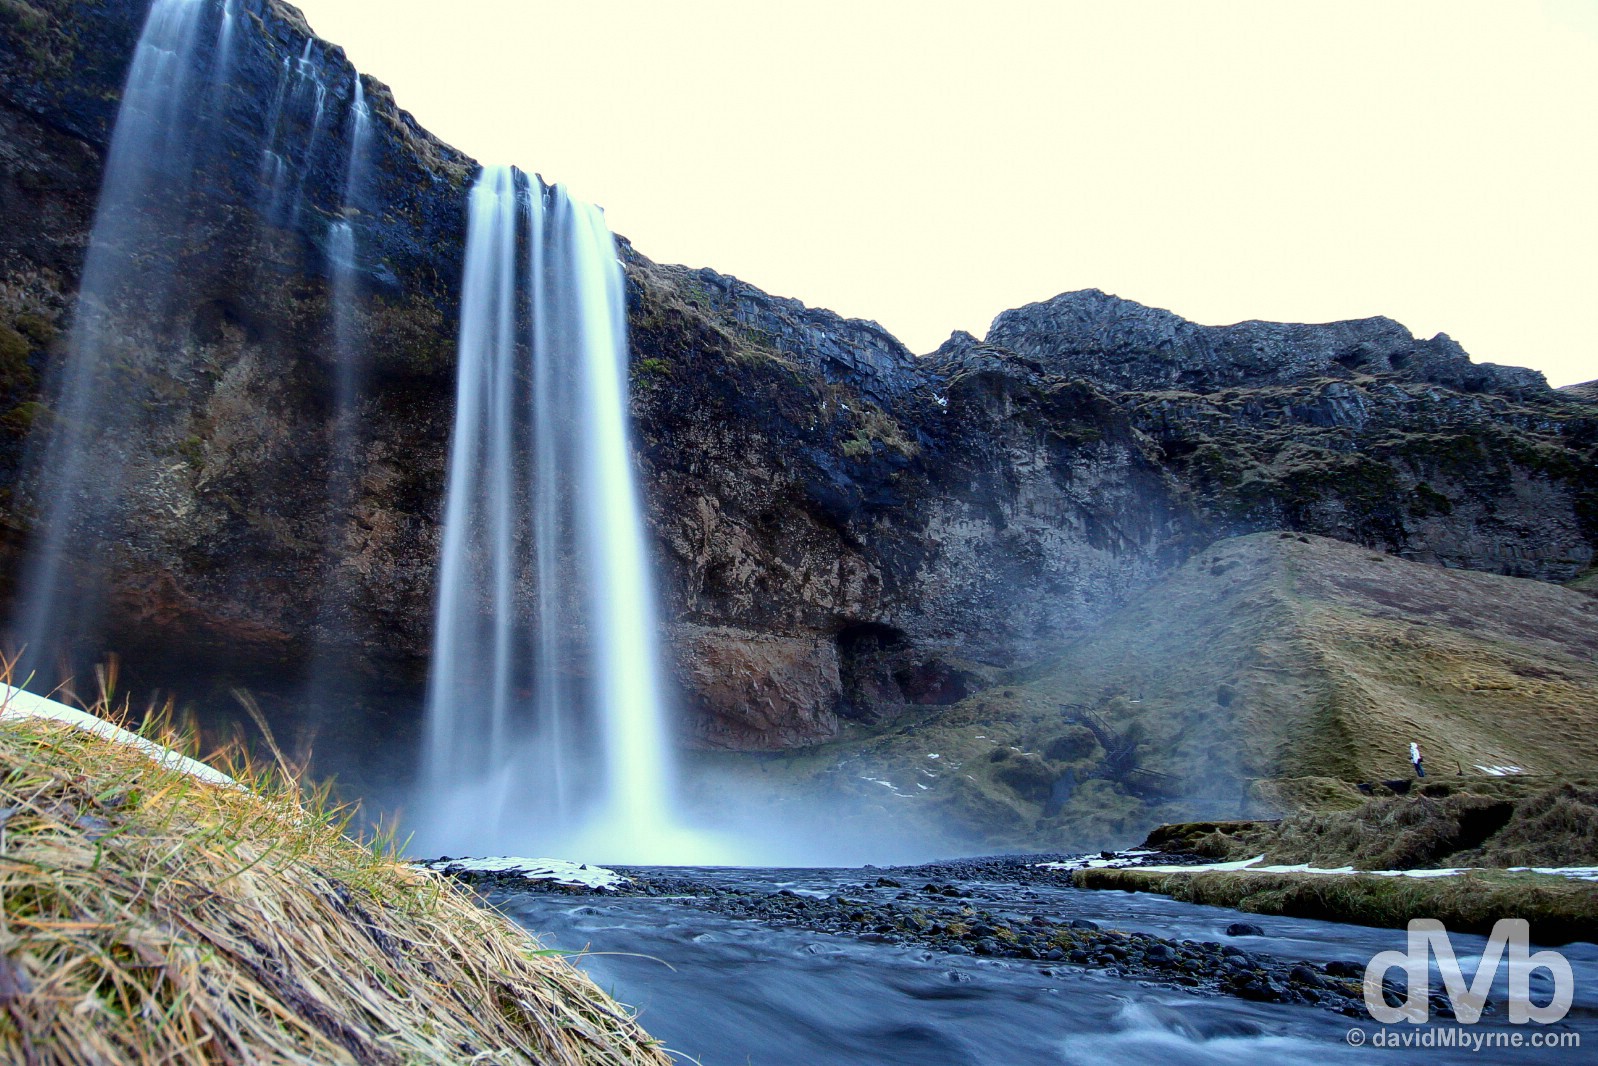 Seljalandsfoss Waterfall, just off Route 1, on the road from Reykjavik to Vik, southern Iceland. December 4, 2012.